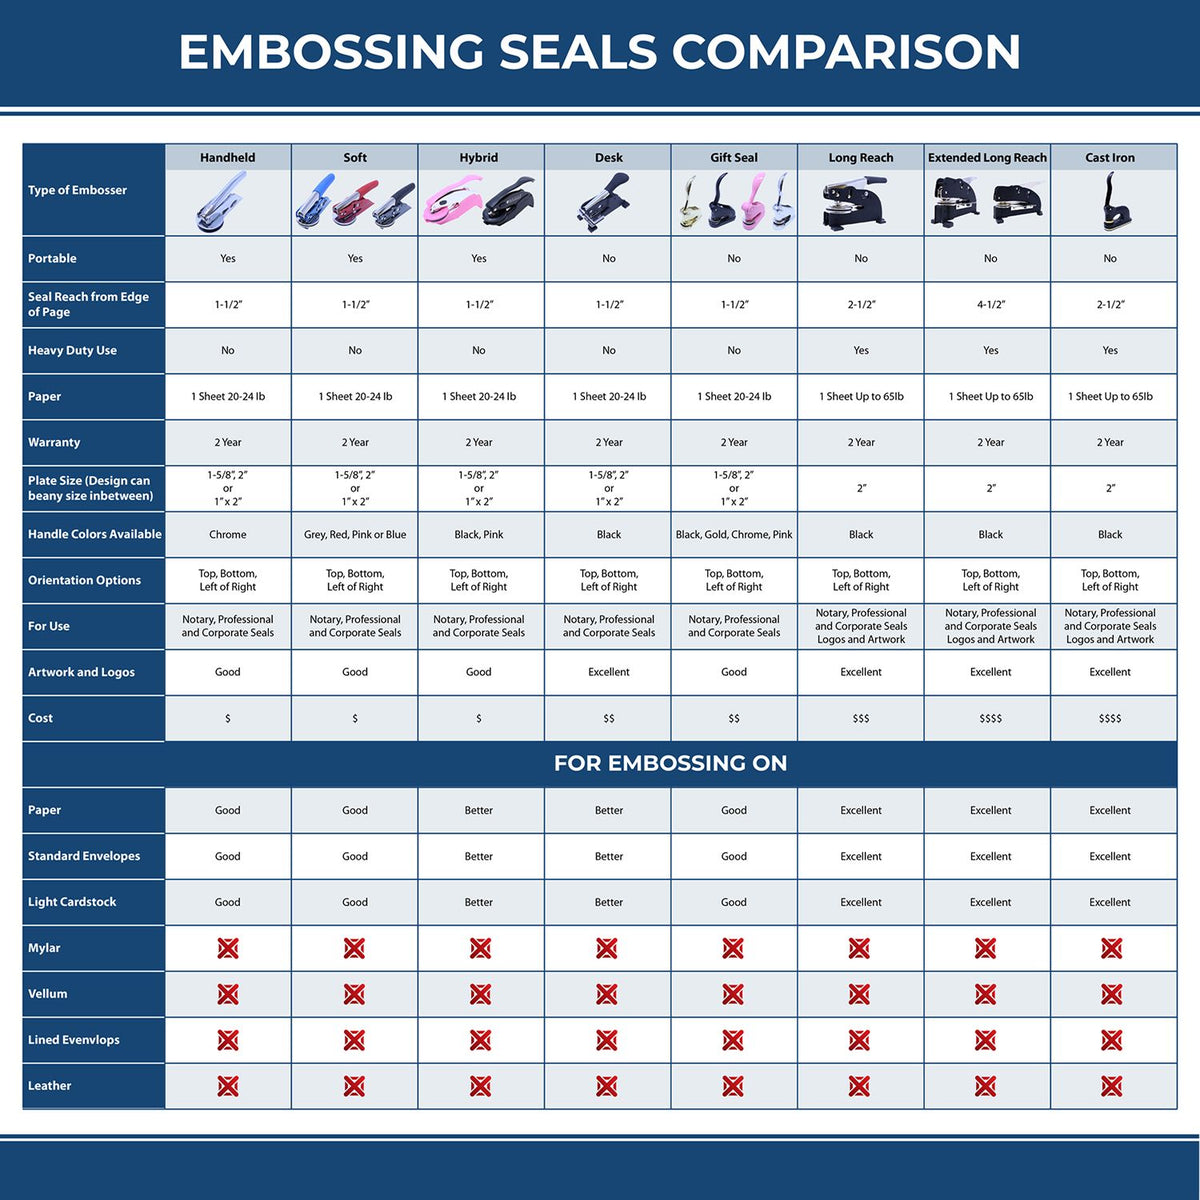 A comparison chart for the different types of mount models available for the Handheld District of Columbia Land Surveyor Seal.